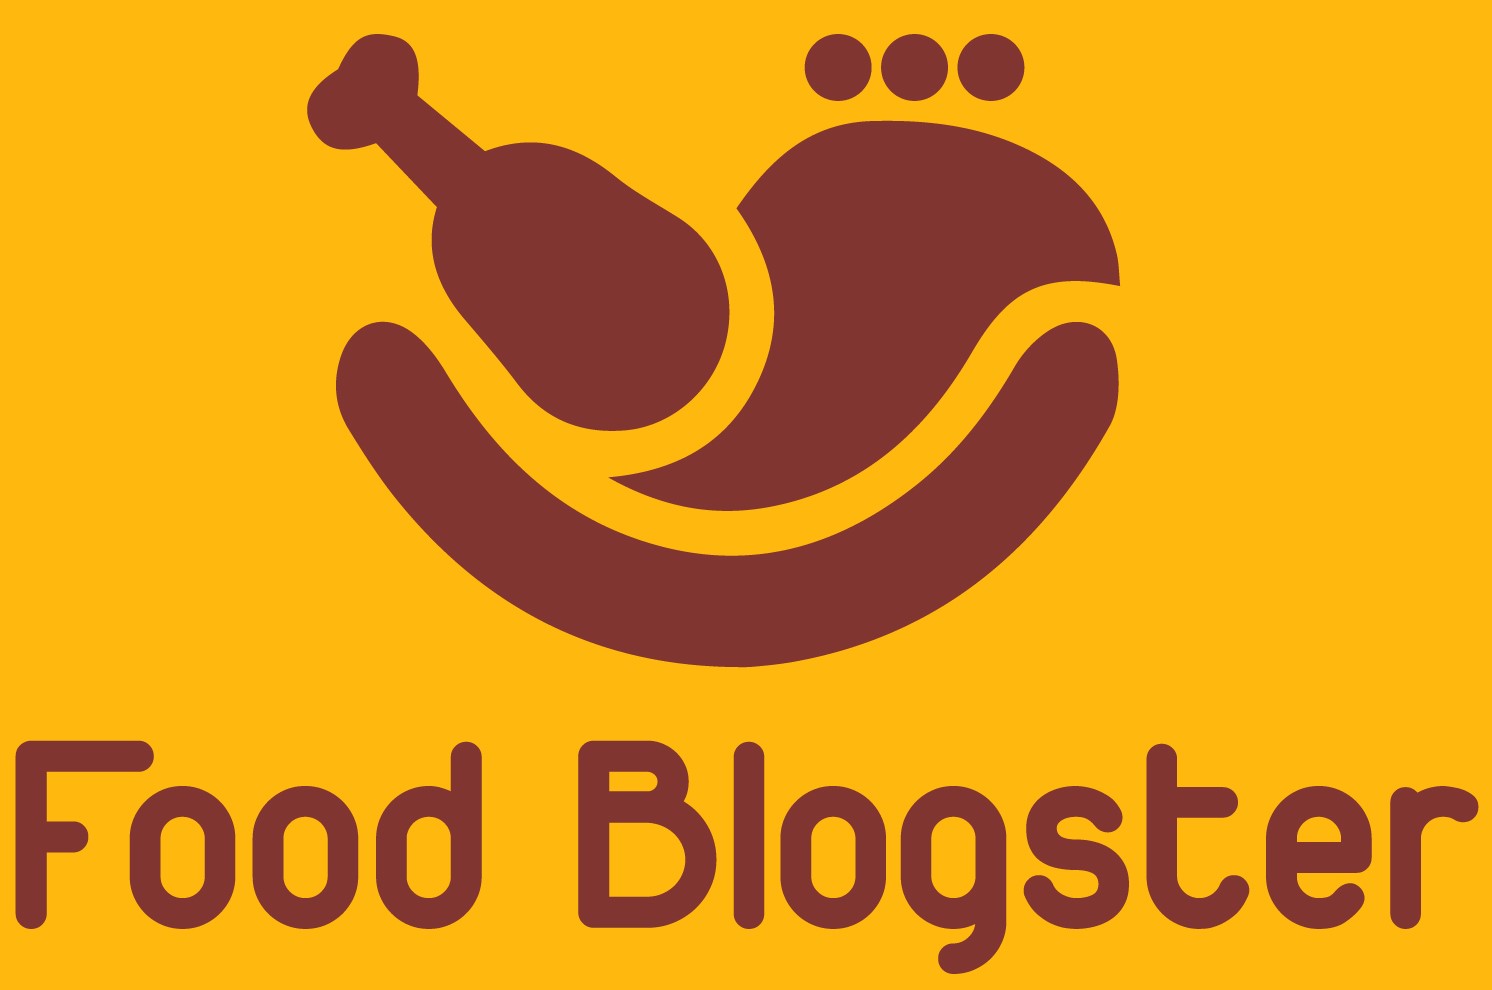 Food Blogster